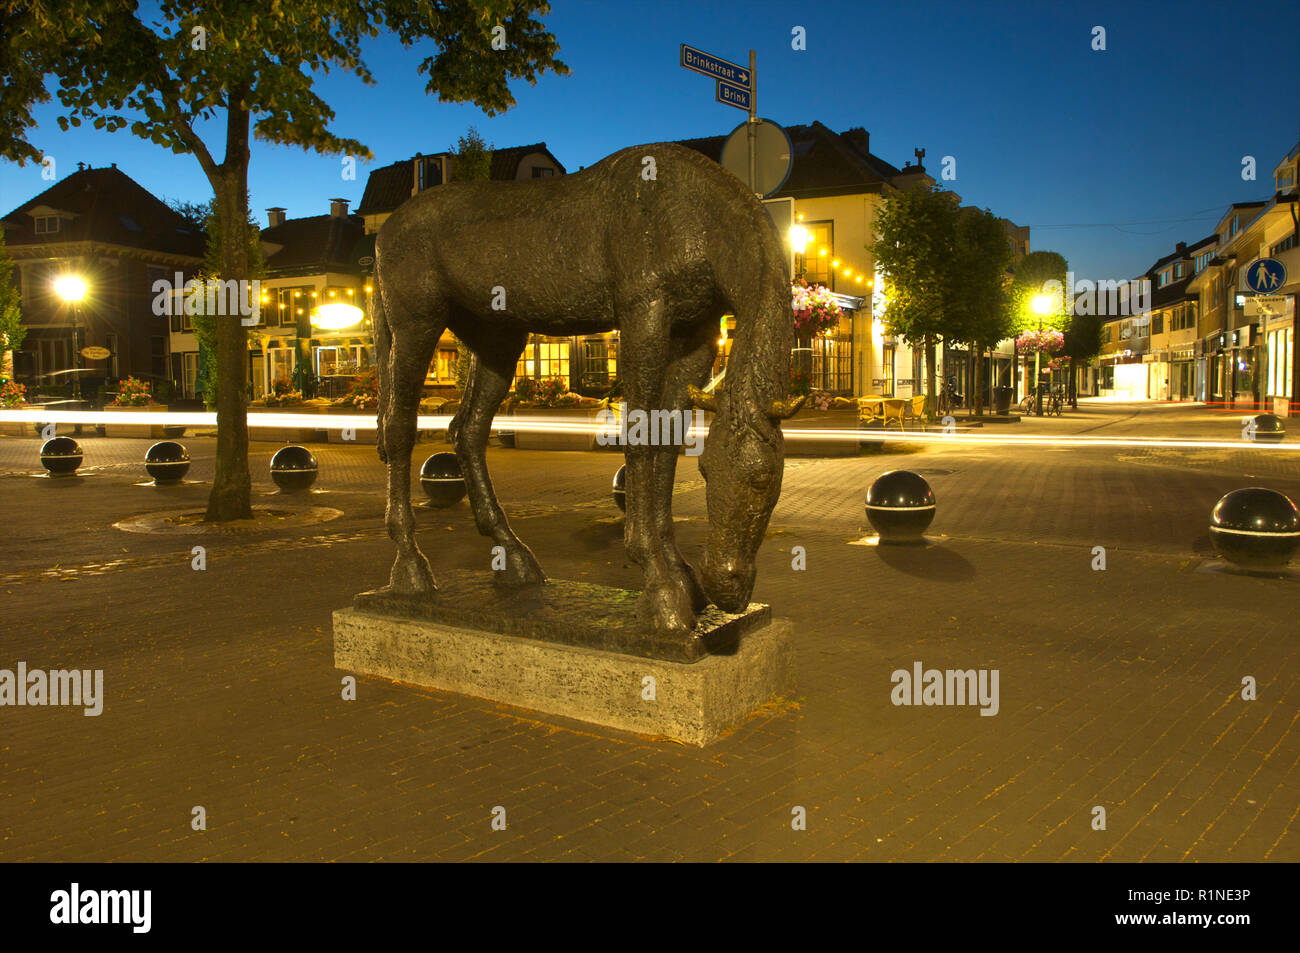 Sculpture of a horse by night in the center of the city of Baarn with a cafe and restaurant in the background with lights, the Netherlands Stock Photo